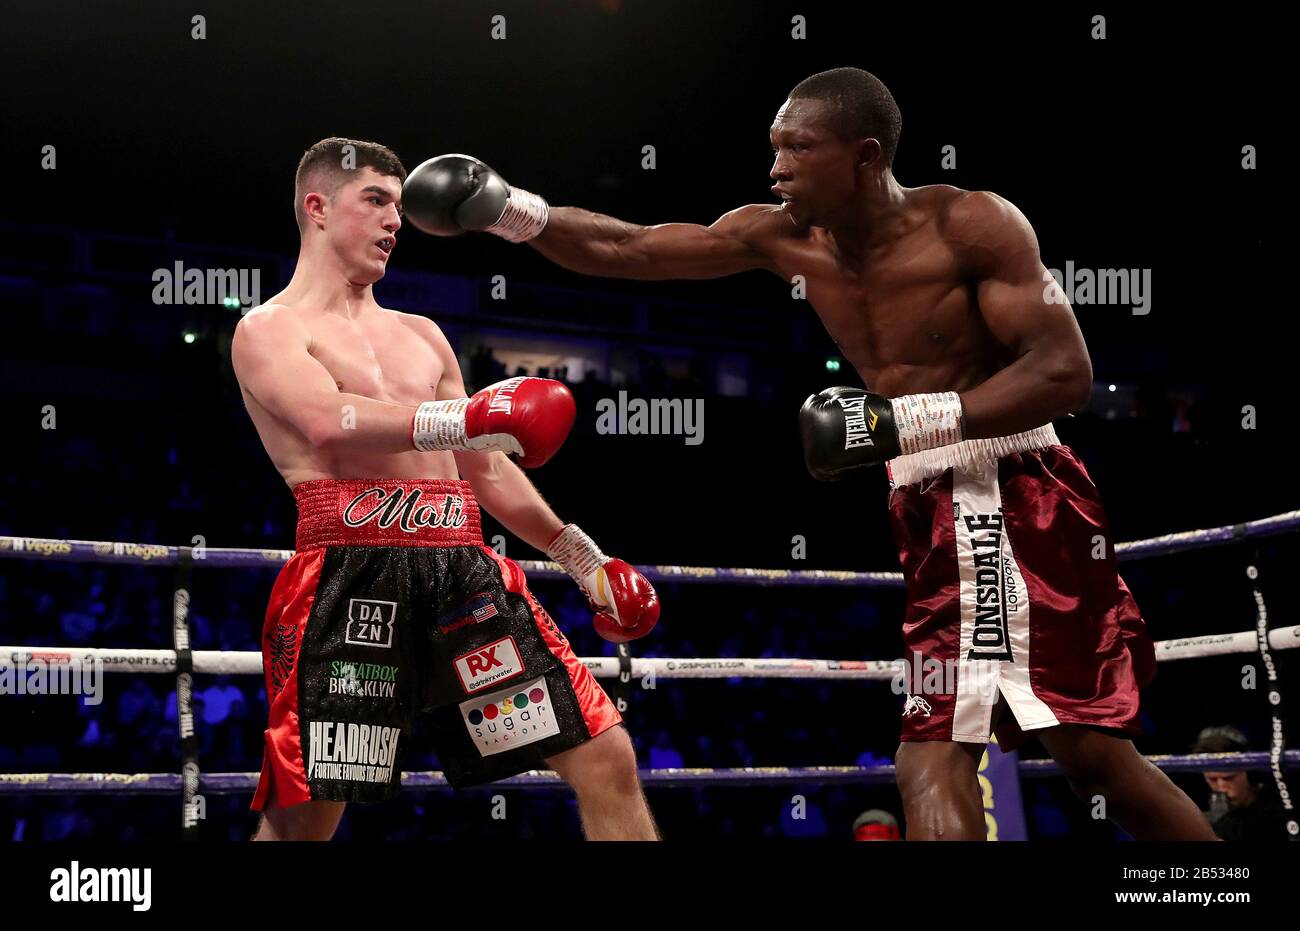 Reshat Mati in action against Abdallah Luanja in their Welterweight contest at Manchester Arena Stock Photo